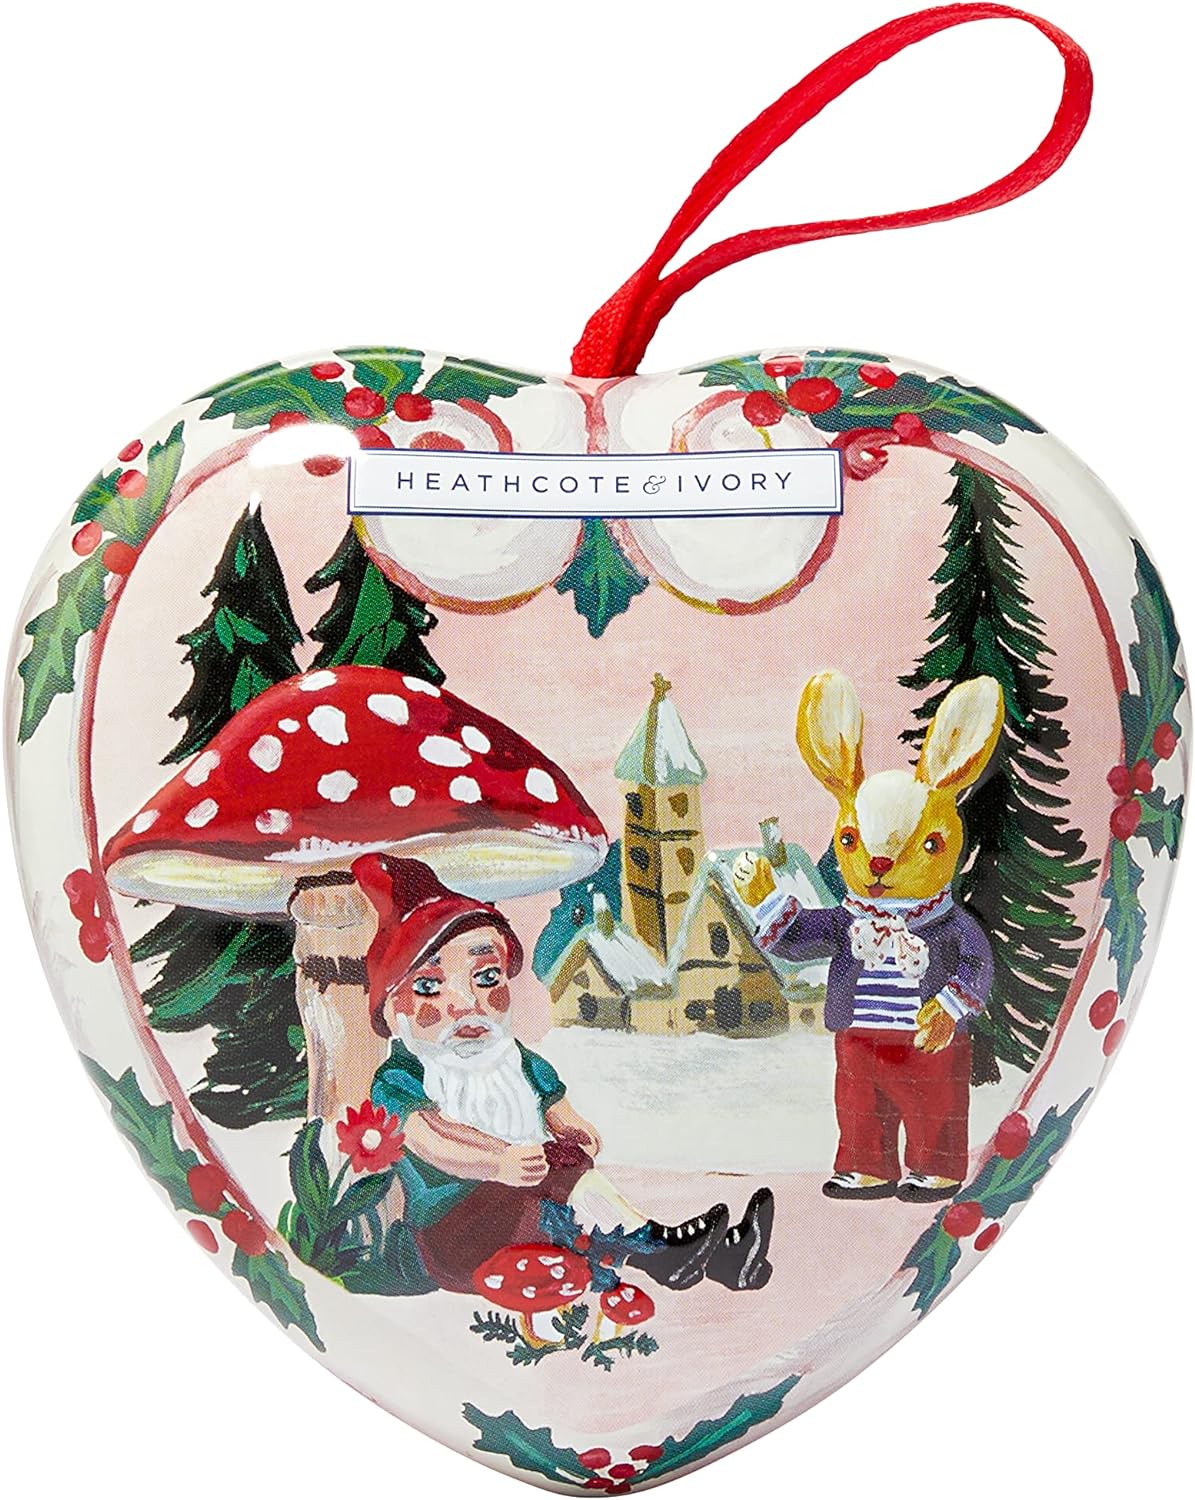 Vintage & Co Beauty X Nathalie Lete Christmas-Scented Soap in Heart Shaped Tin 90g (with display tray) - Festive Heart Shaped Moisturizing Soap, Holiday-Themed Packaging